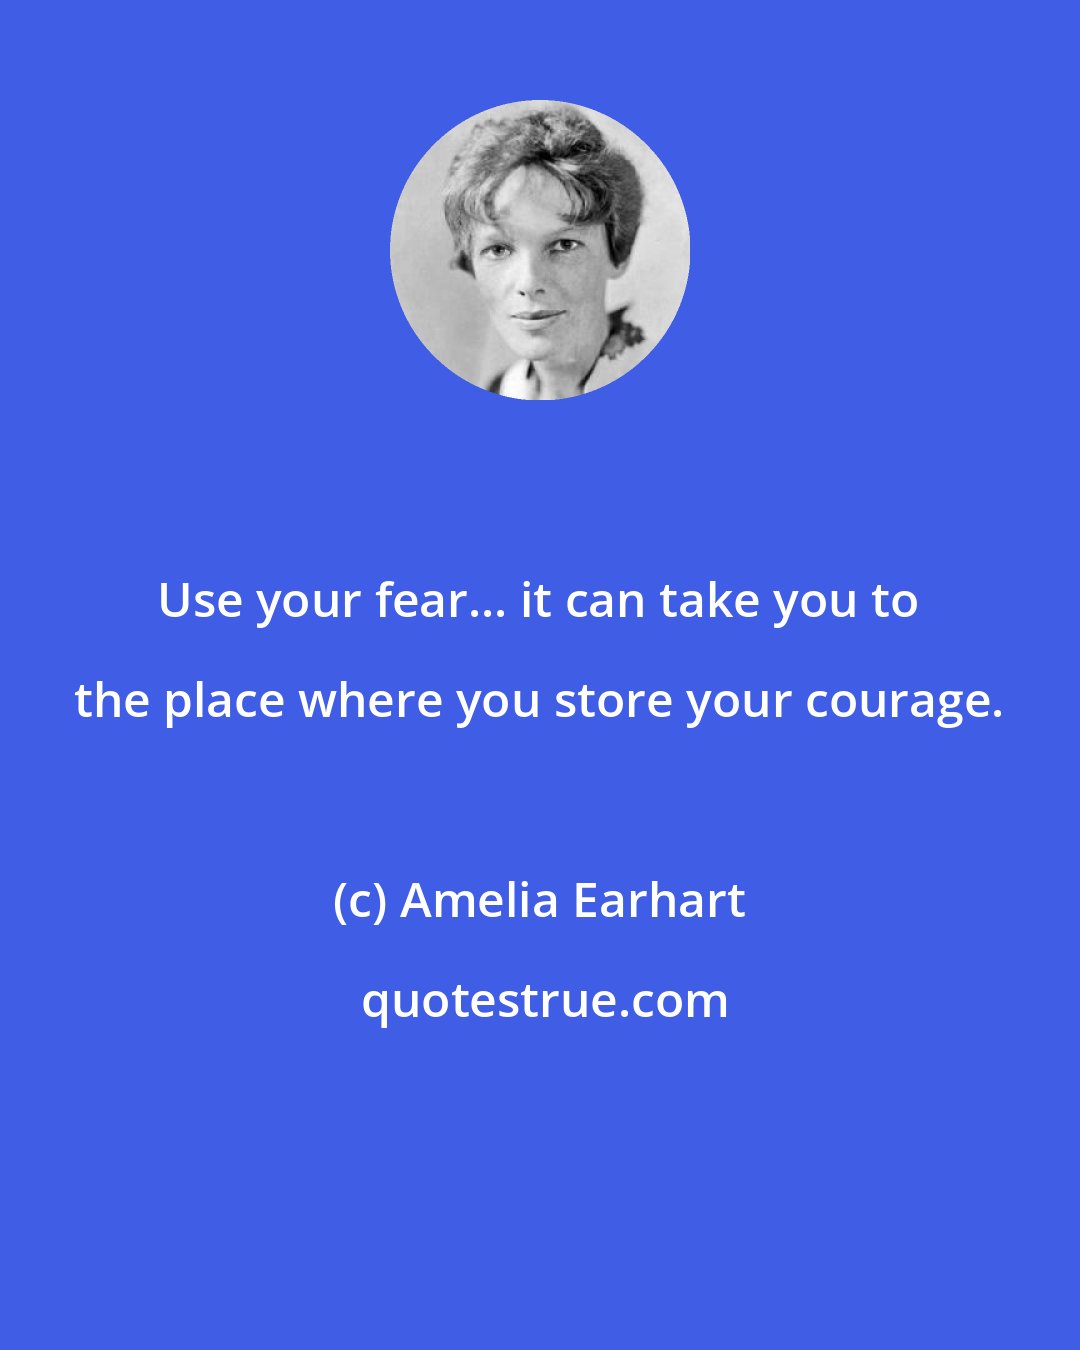 Amelia Earhart: Use your fear... it can take you to the place where you store your courage.